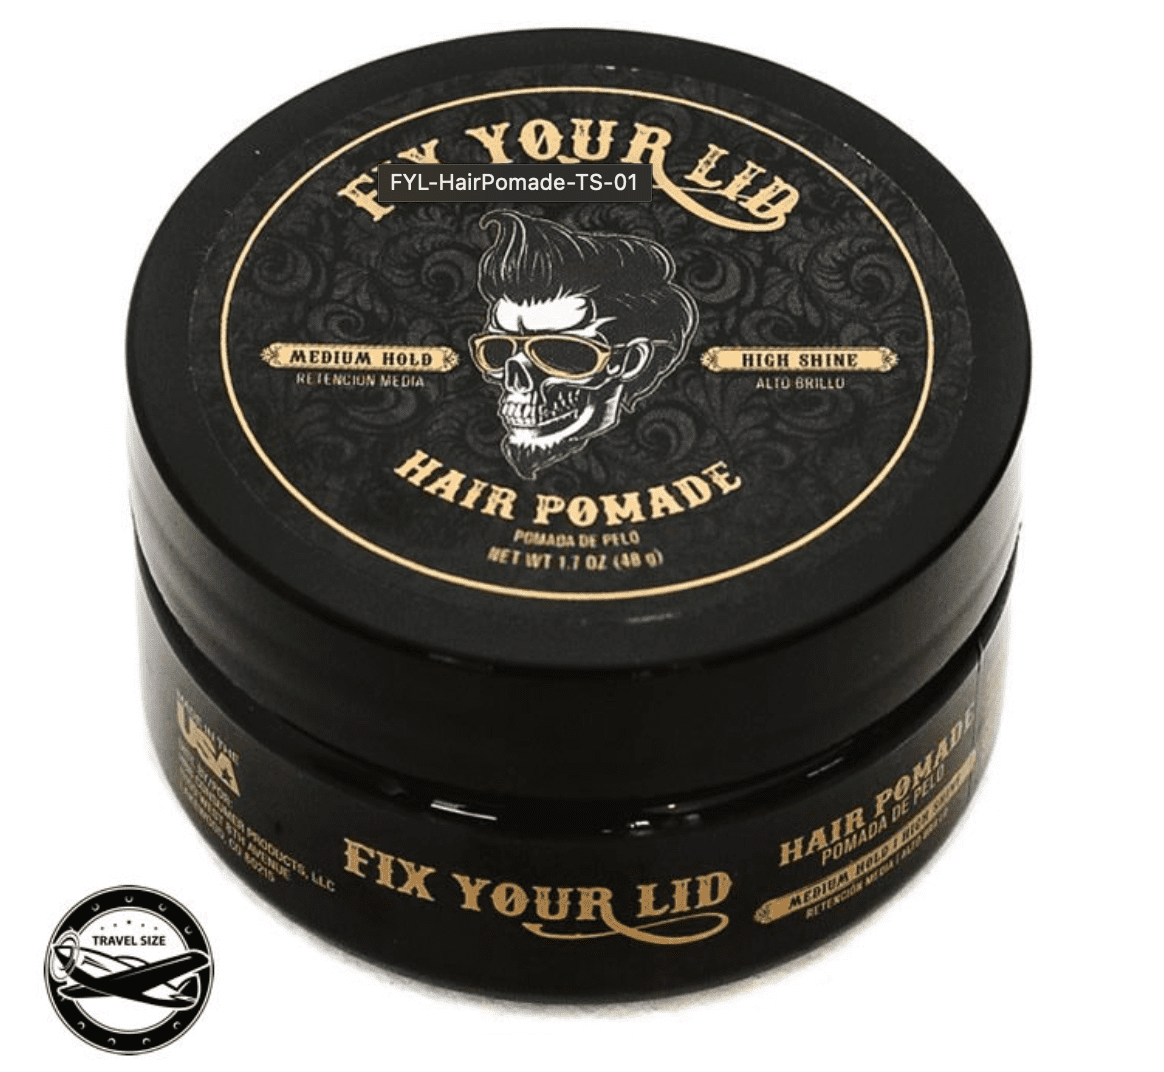 NEW* LOT OF 2 FIX YOUR LID HAIR POMADE MEDIUM HOLD AND HIGH SHINE